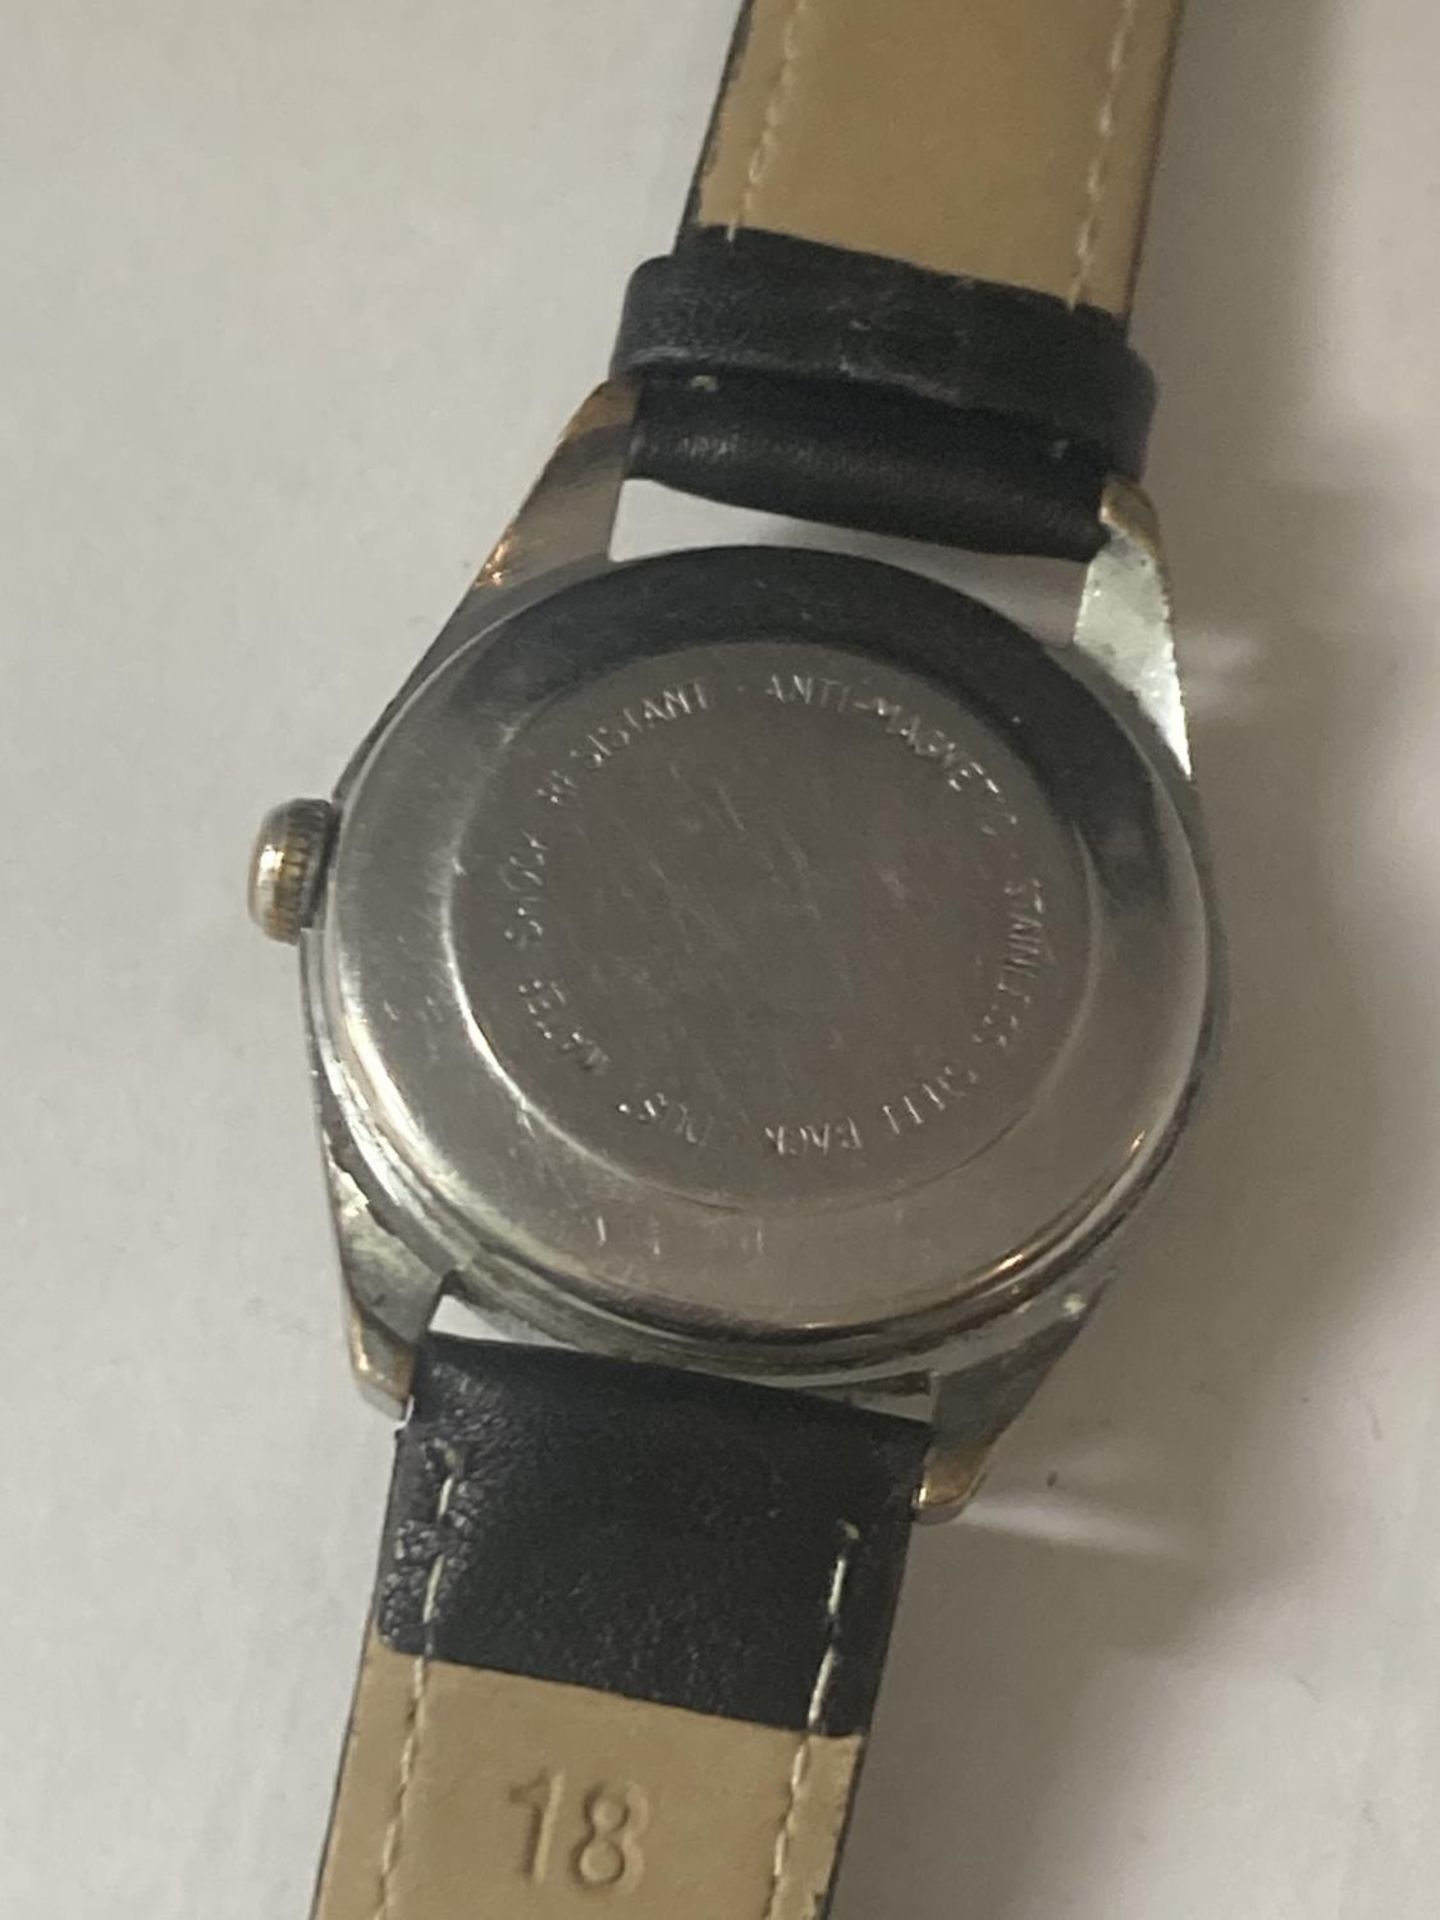 A MILITARY SERVICES WATCH [BELIEVED TO BE IN WORKING ORDER - NO WARRANTY GIVEN ] - Image 5 of 6